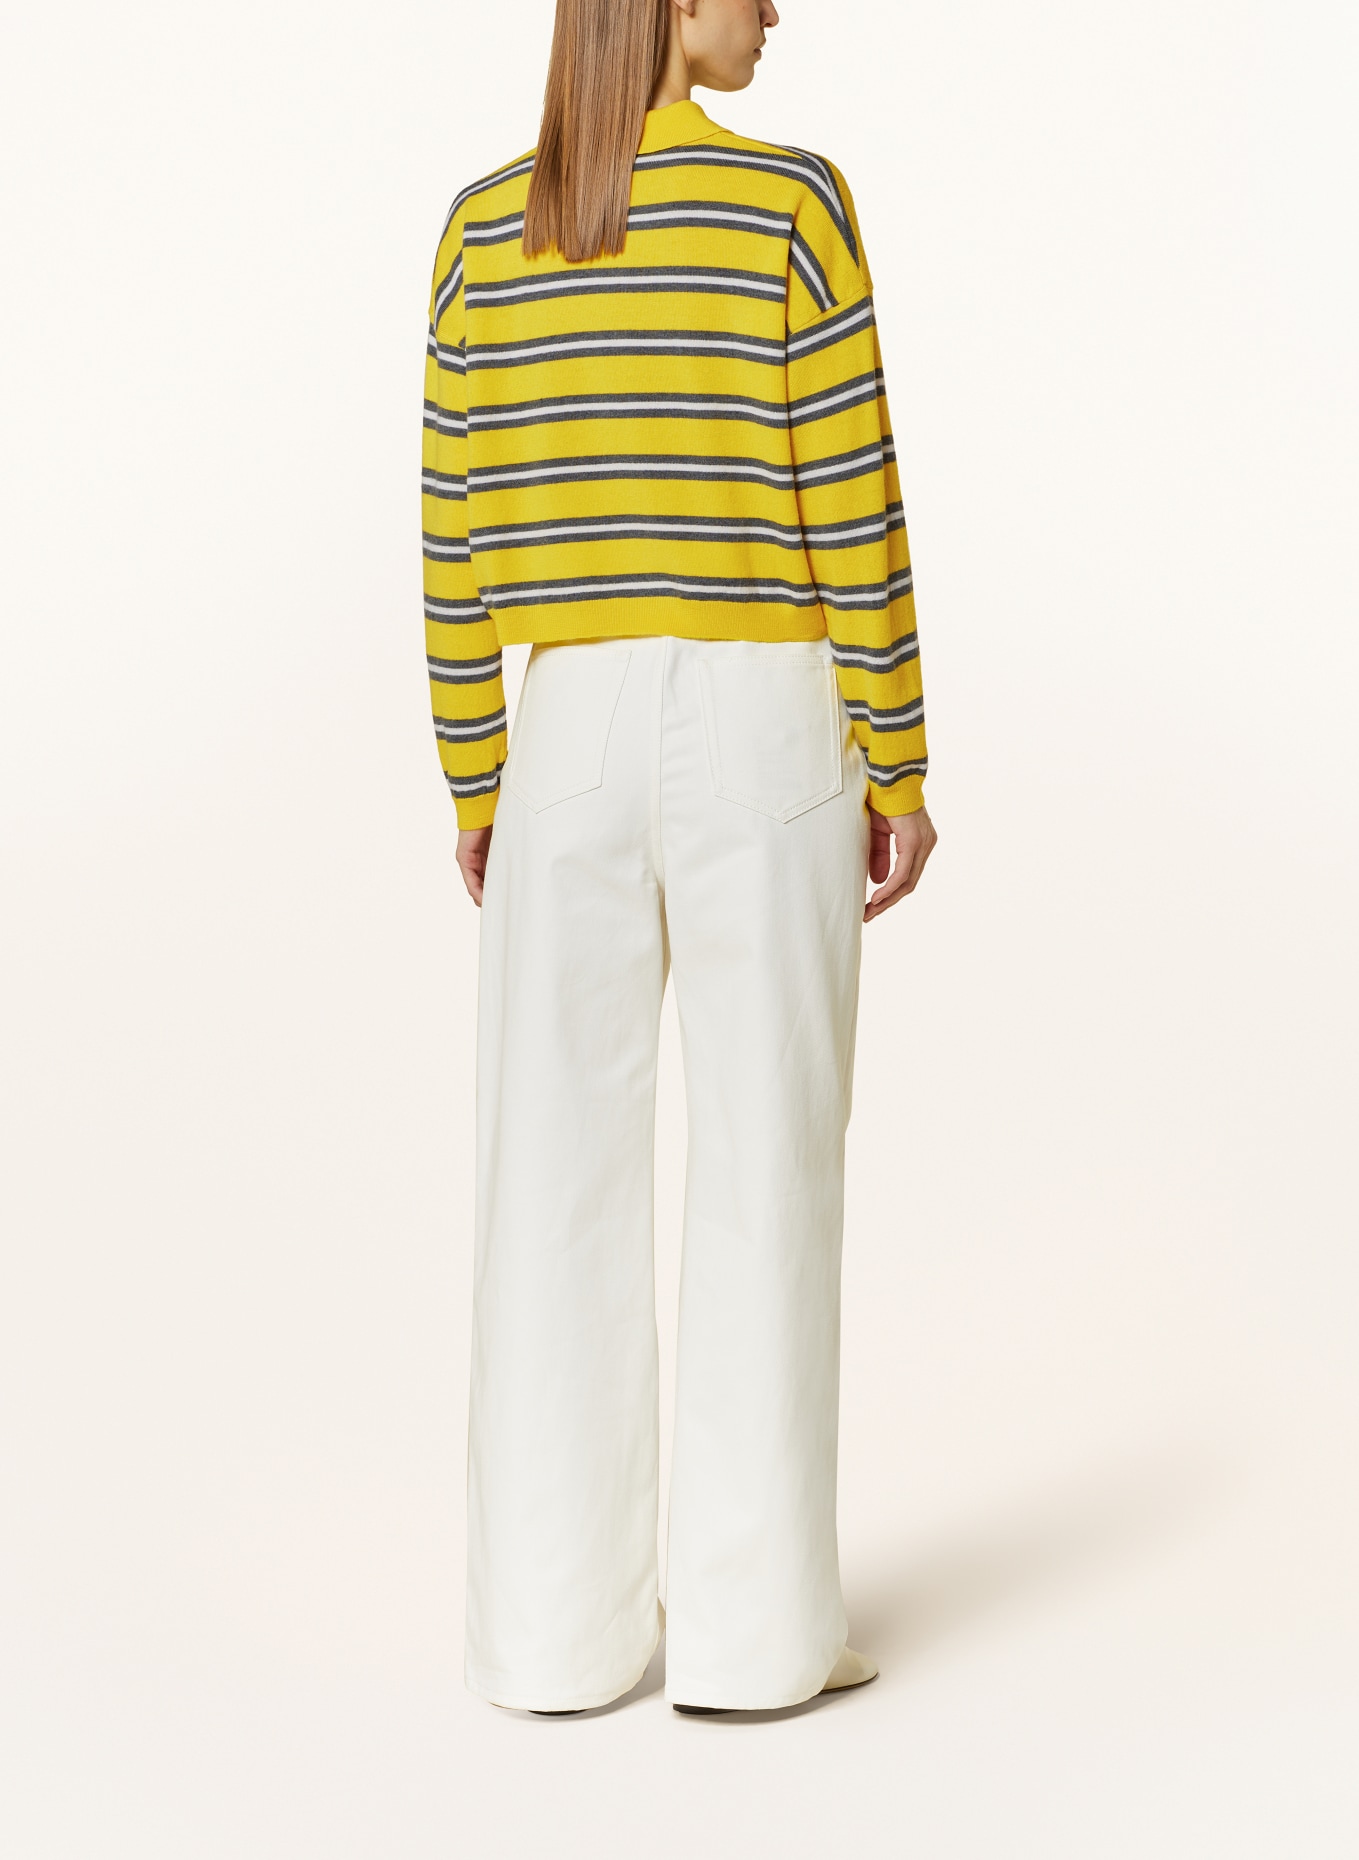 LOEWE Knitted polo shirt made of linen, Color: YELLOW/ GRAY/ WHITE (Image 3)